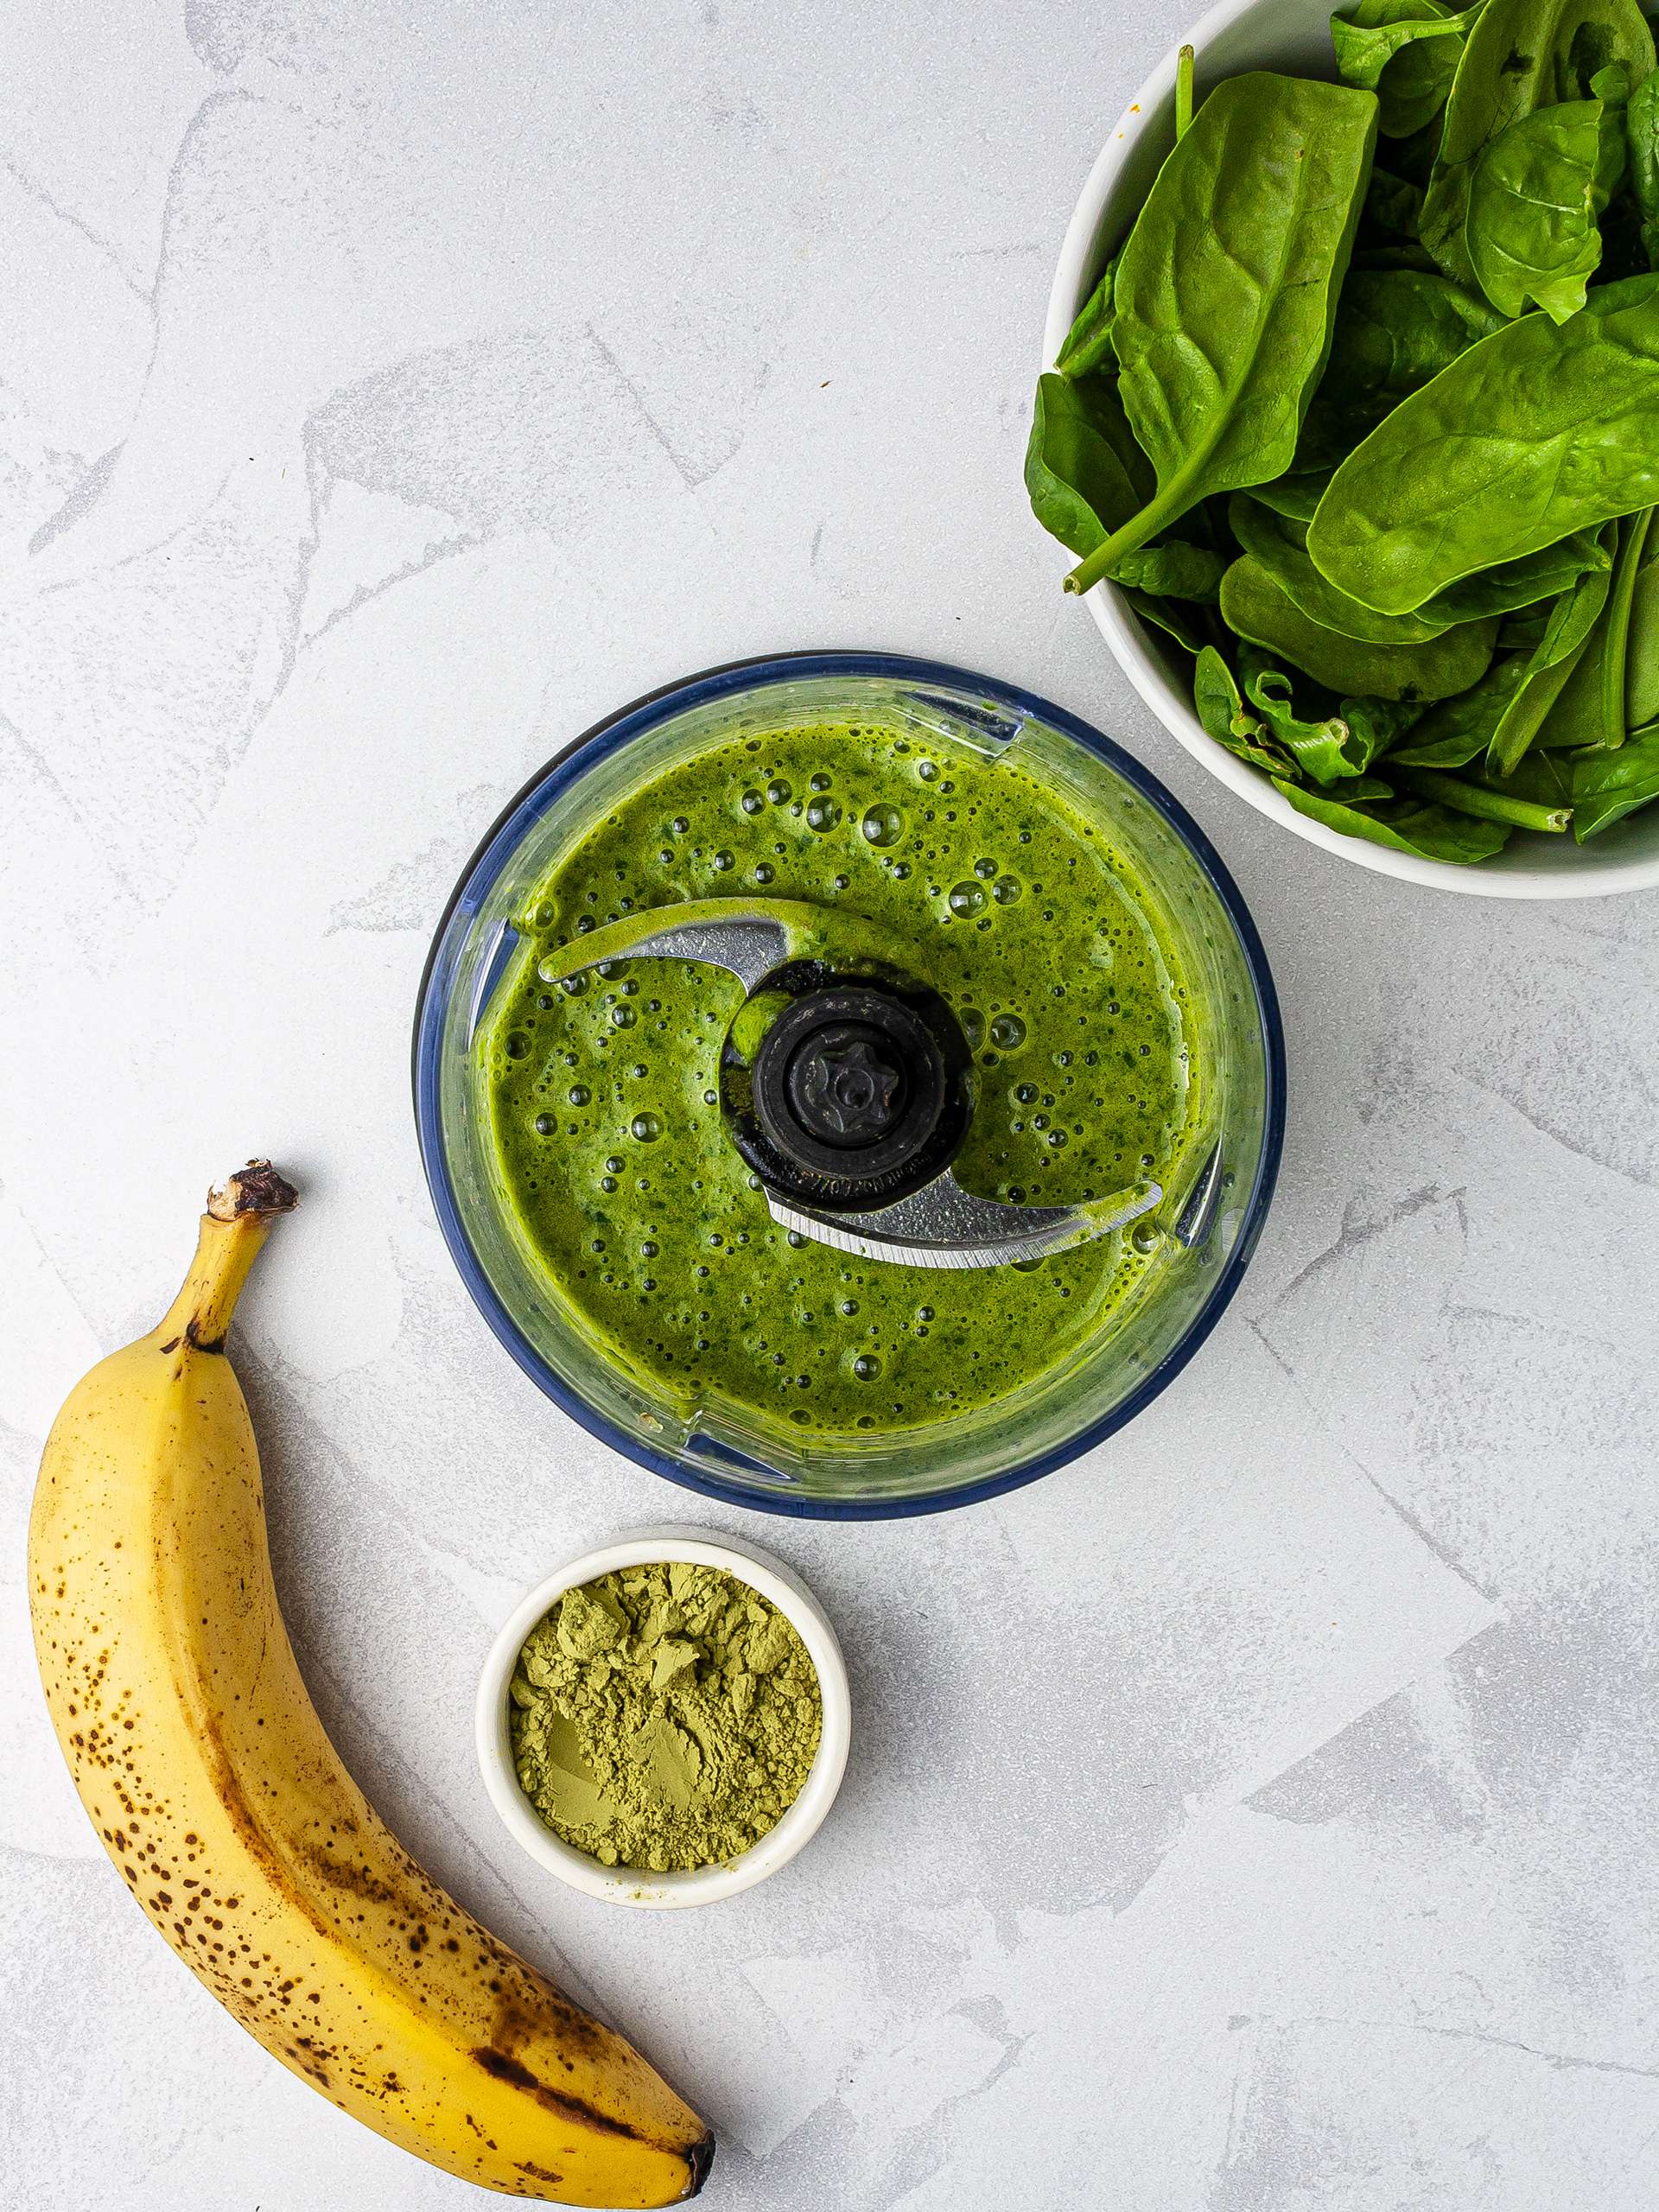 Green smoothie with spinach, banana, and match green tea powder.